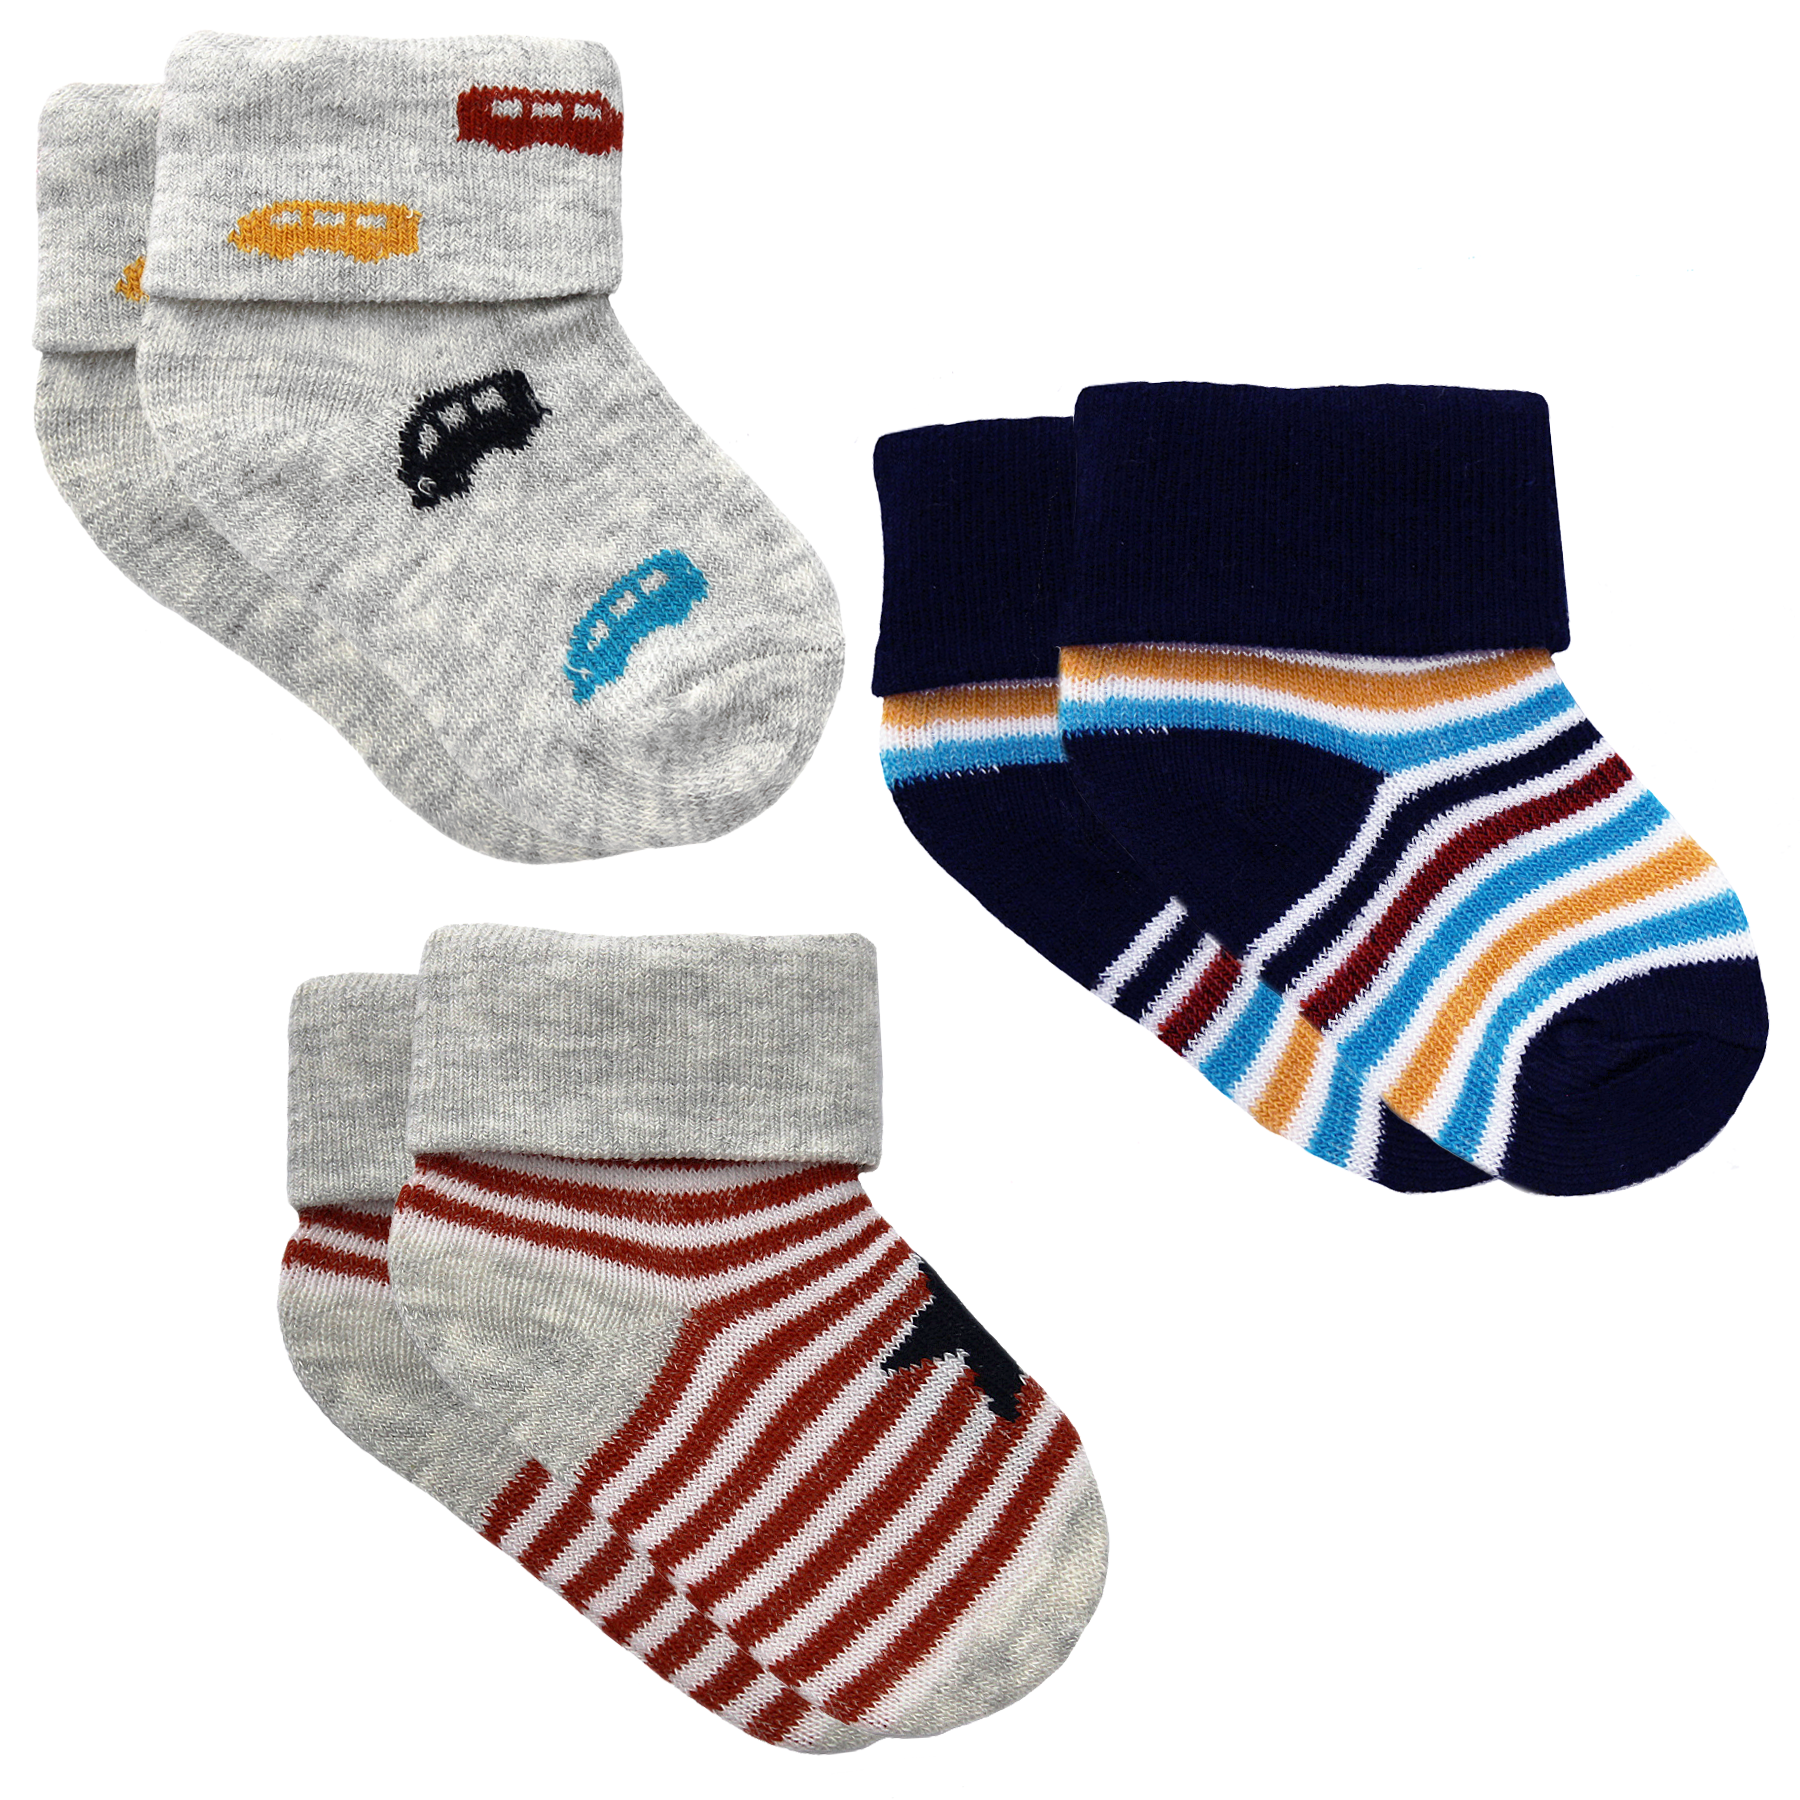 Just Too Cute Cotton Rich 3 Pairs Turnover Cars & Stripes Ankle Socks